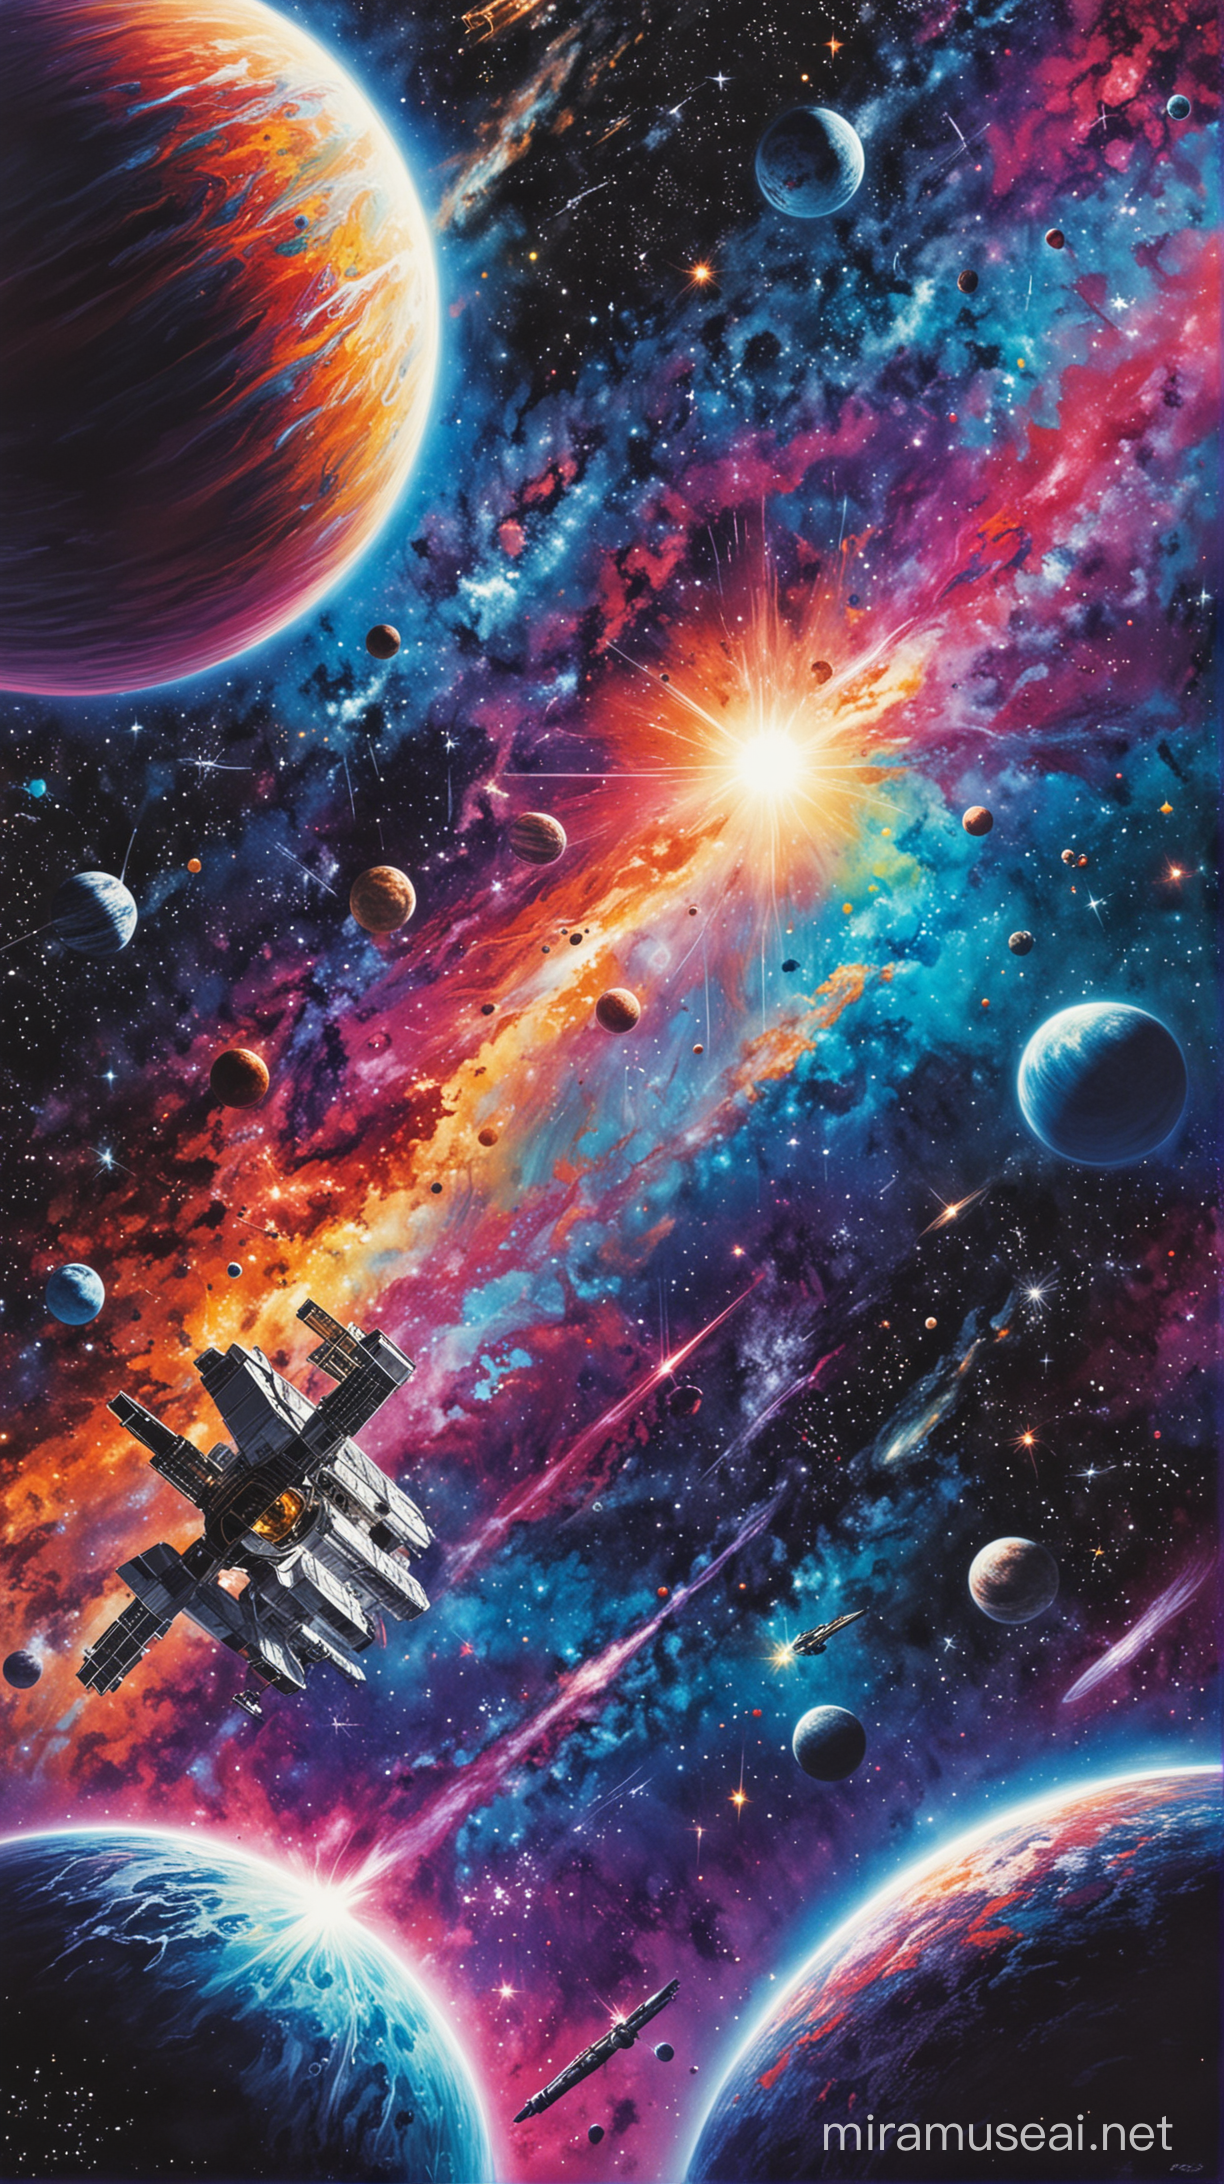 Vibrant CloseUp of Colorful Space Theme Poster